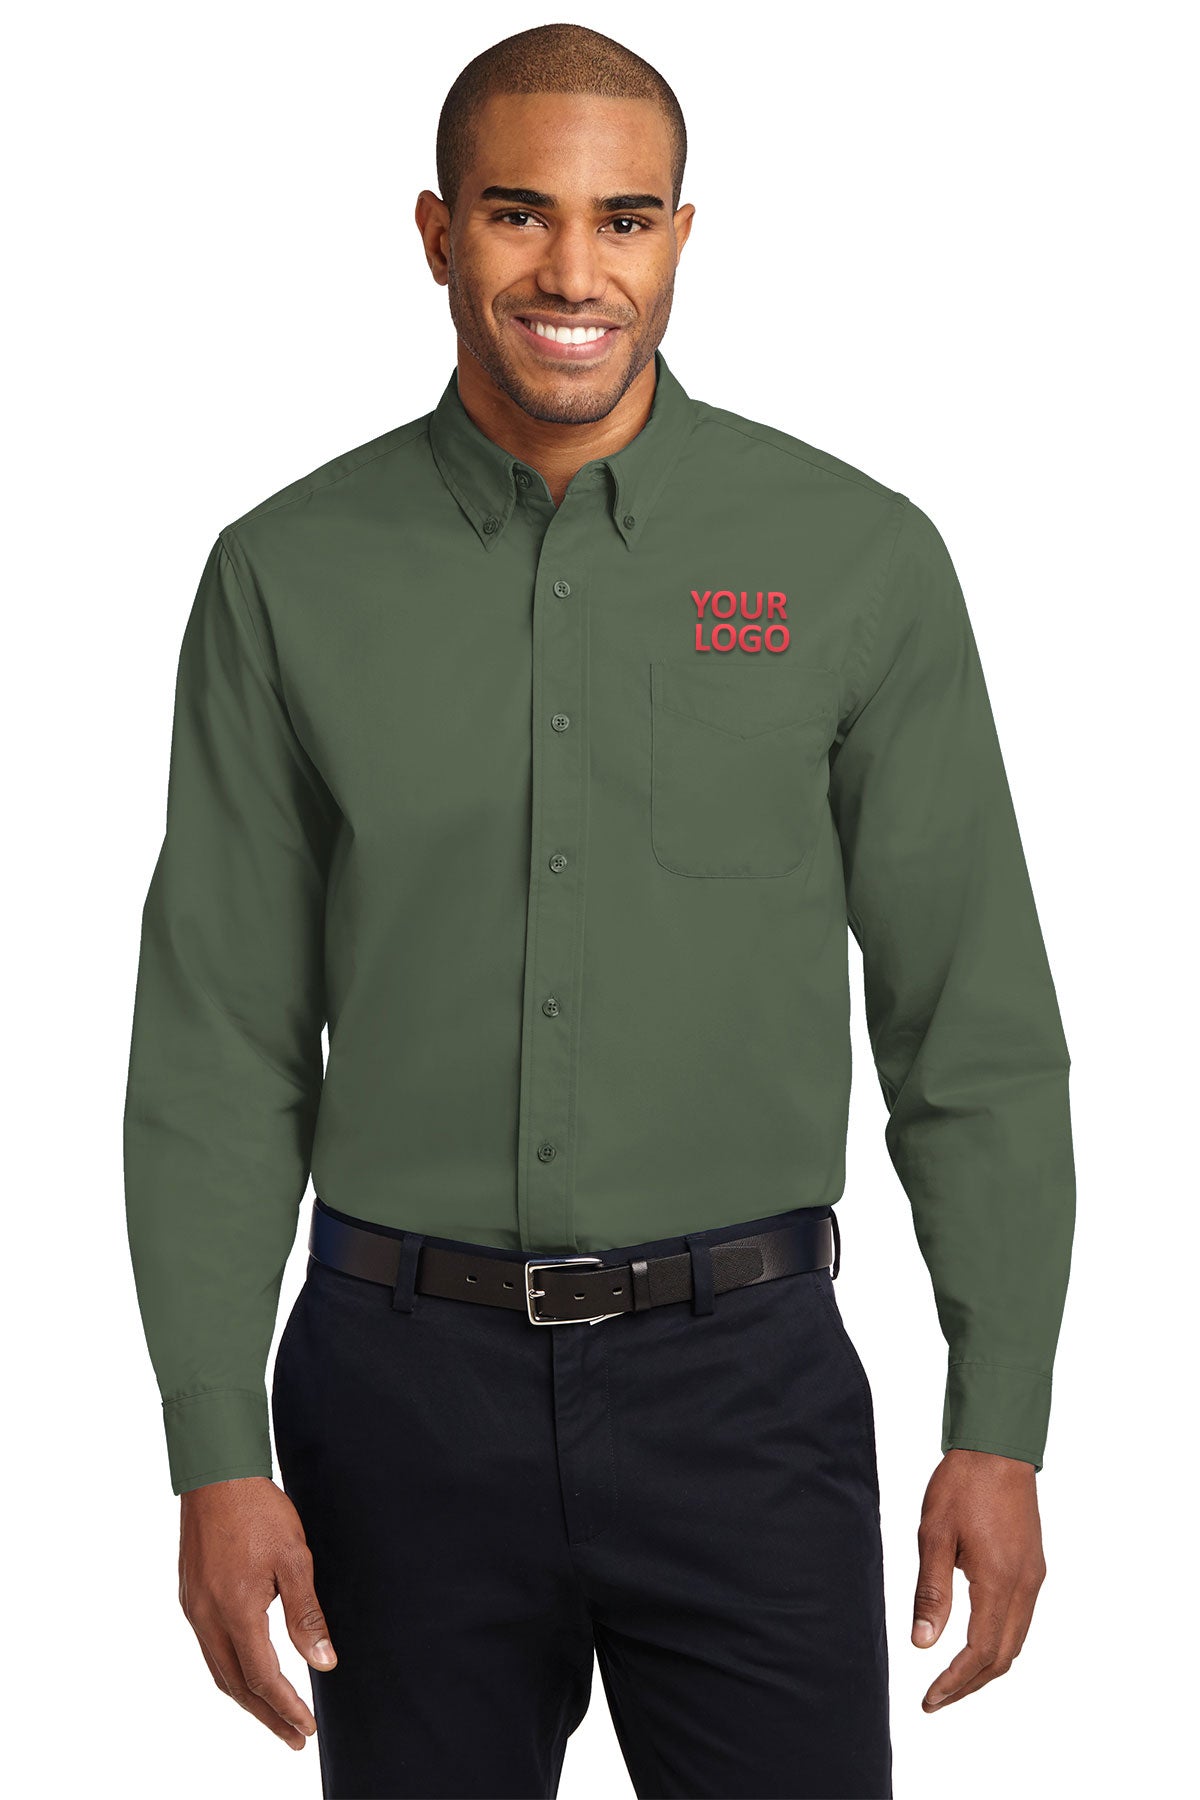 Port Authority Clover Green S608 custom embroidered shirts